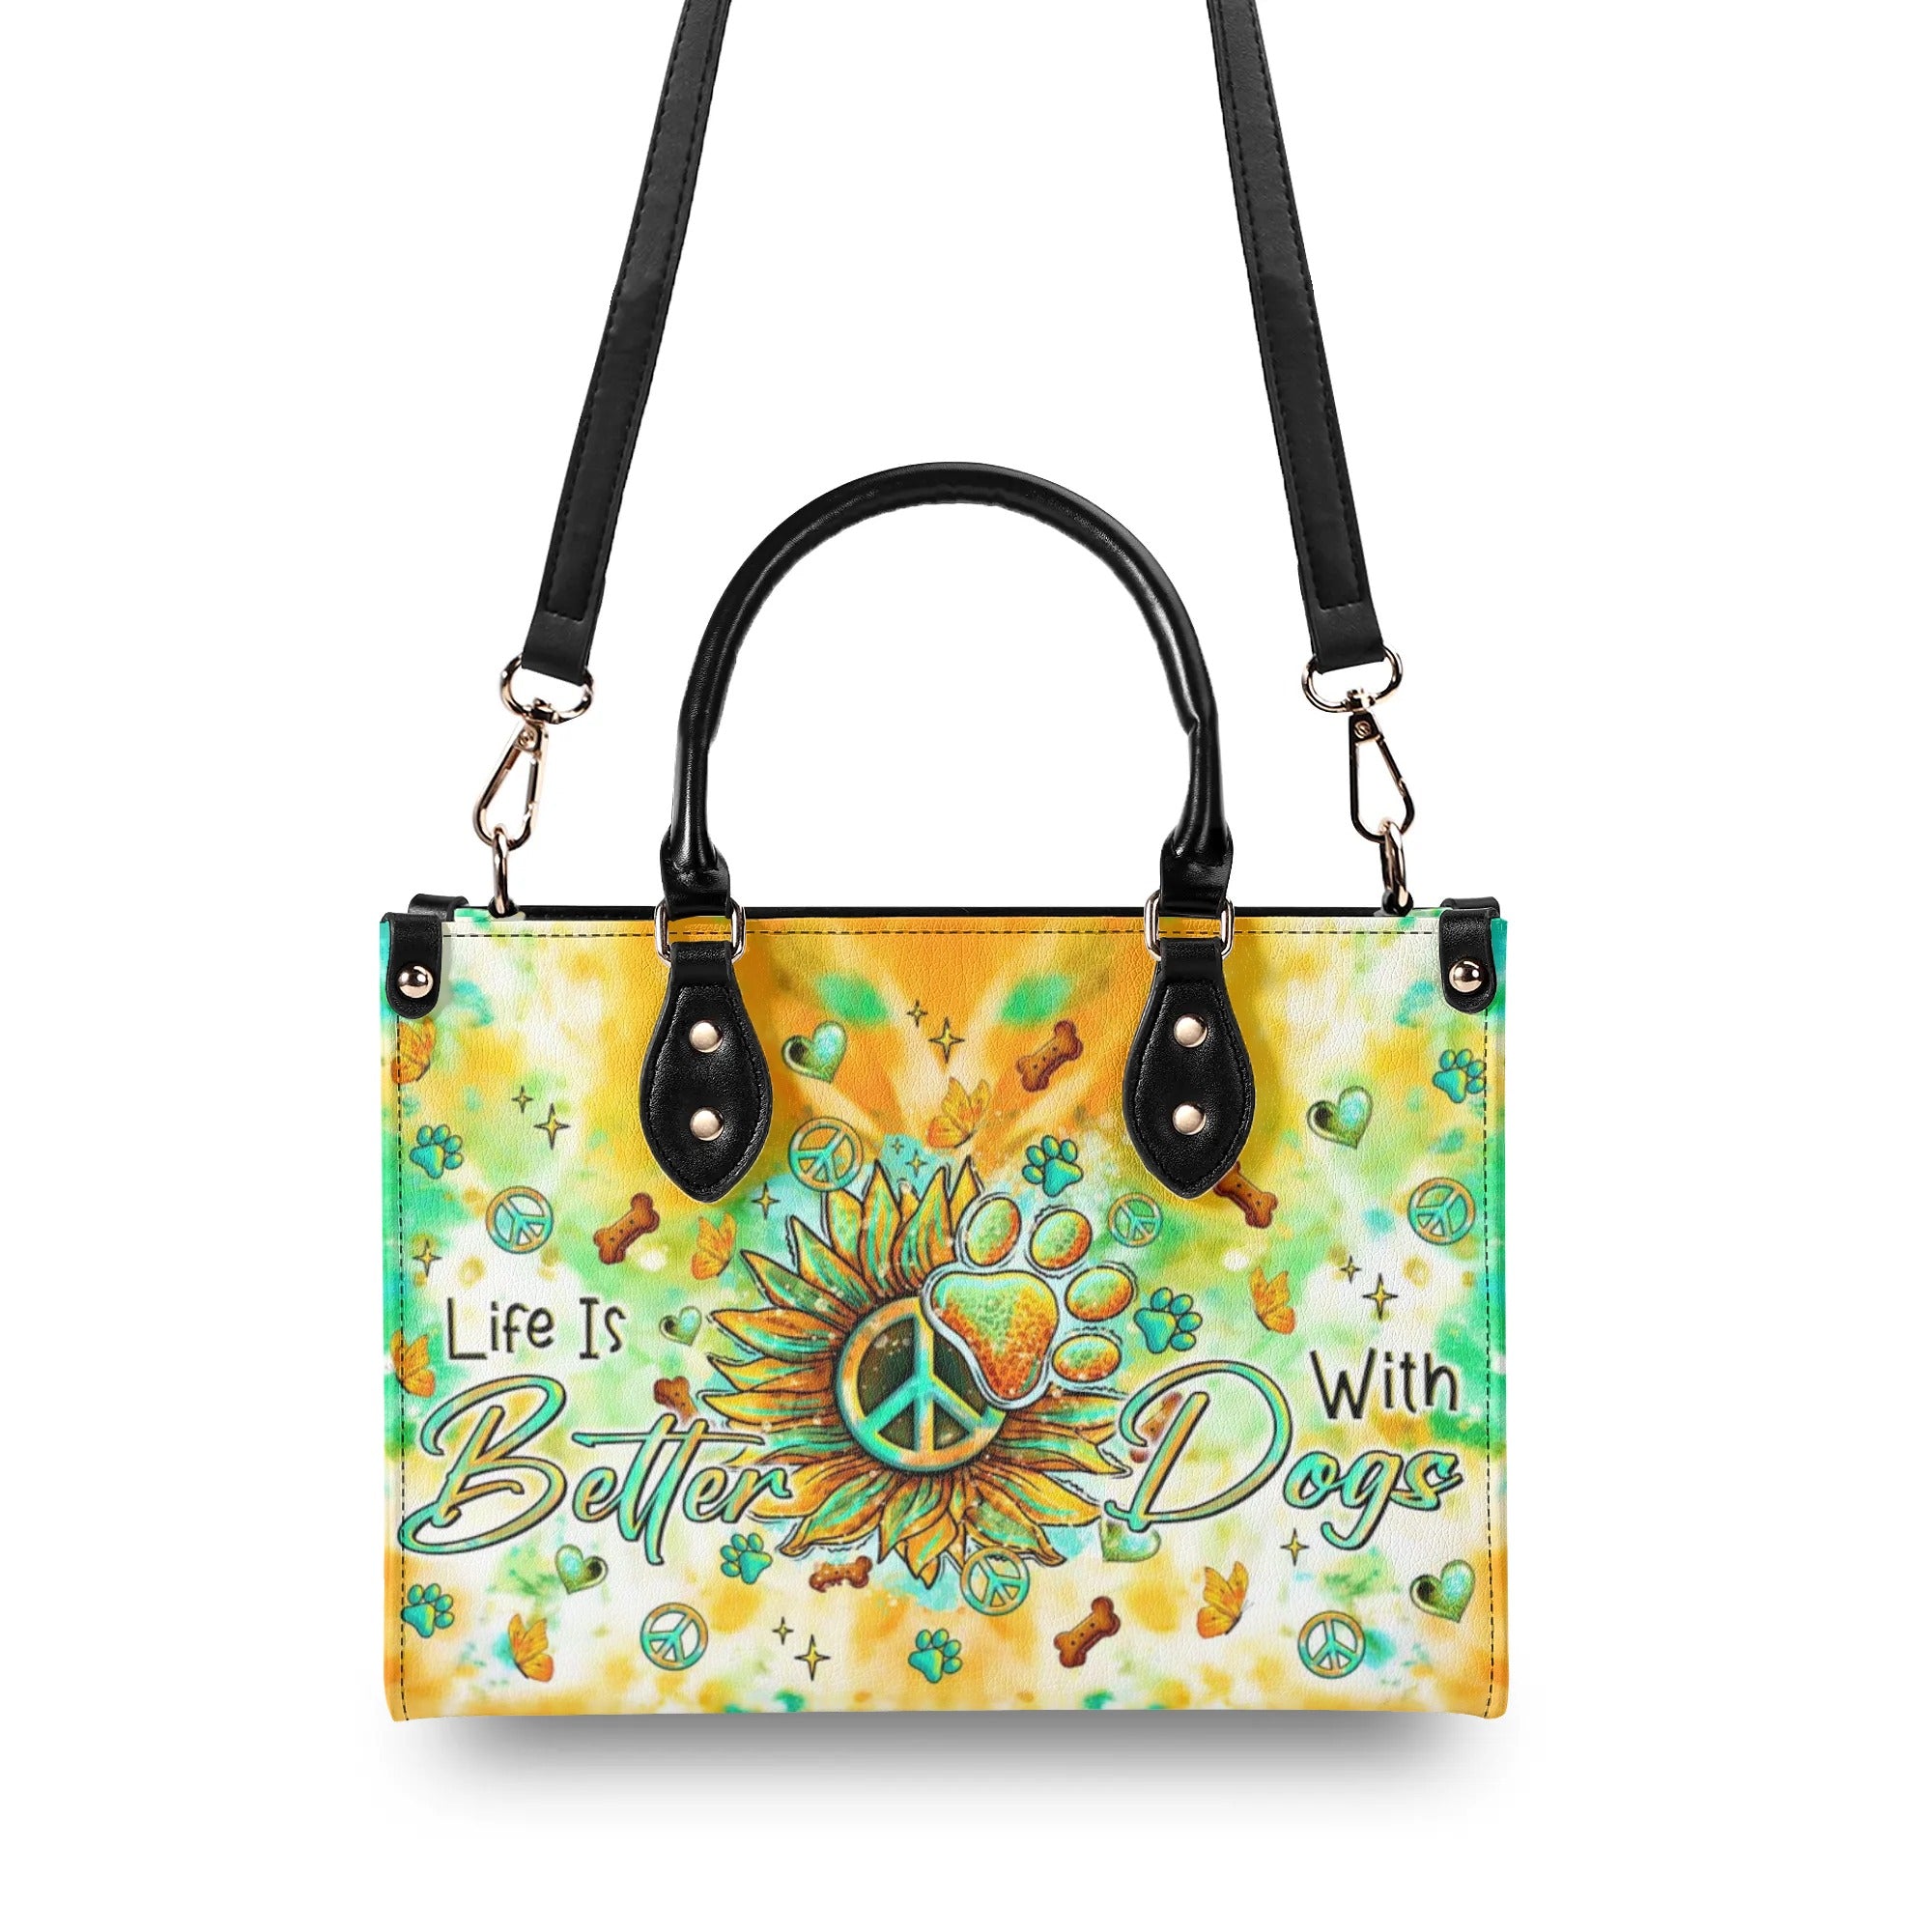 LIFE IS BETTER WITH DOGS SUNFLOWER LEATHER HANDBAG - TLTR2106245